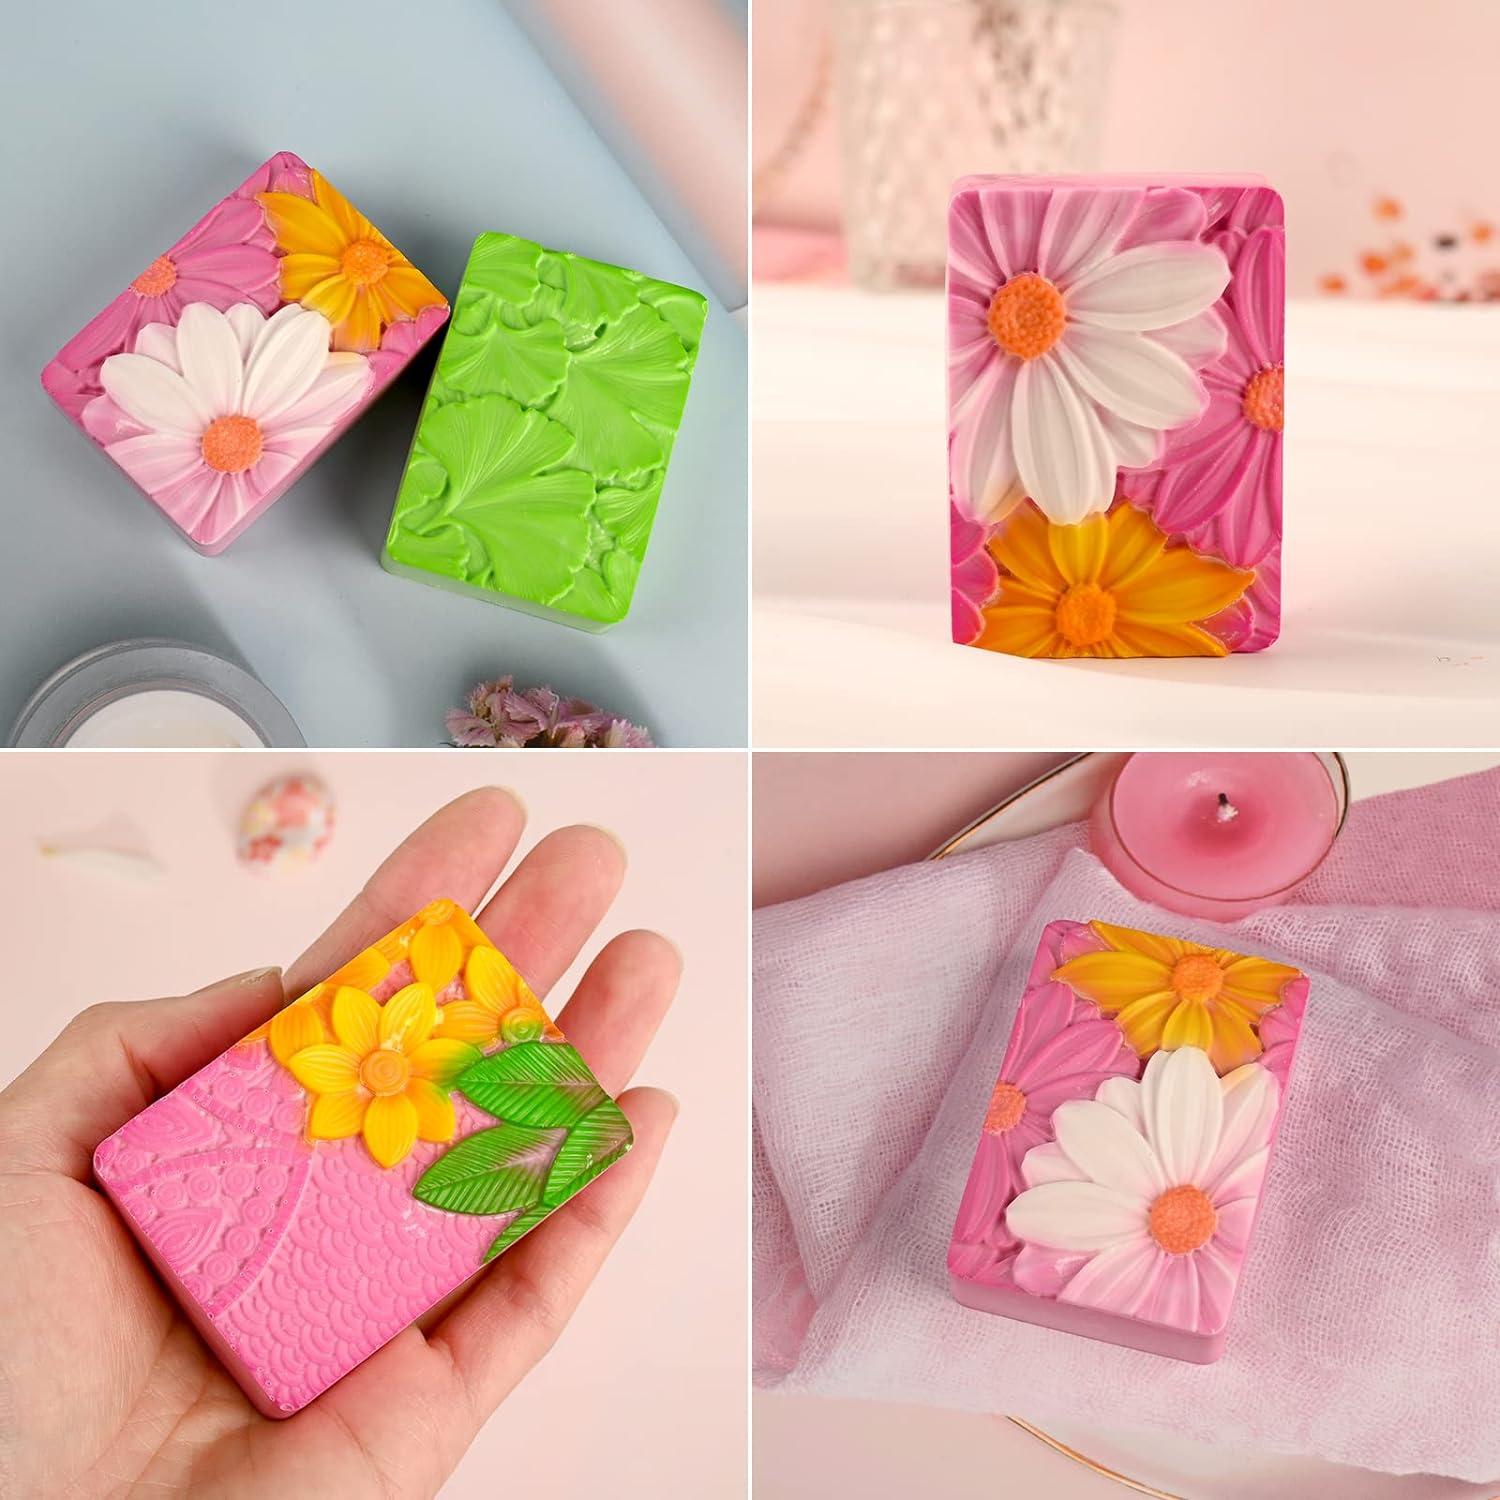 HUAKENER Silicone Soap Molds 2 Pack 4-Cavity Rectangle Soap Mold Flower  Soap Making Molds Flowers and Leaves